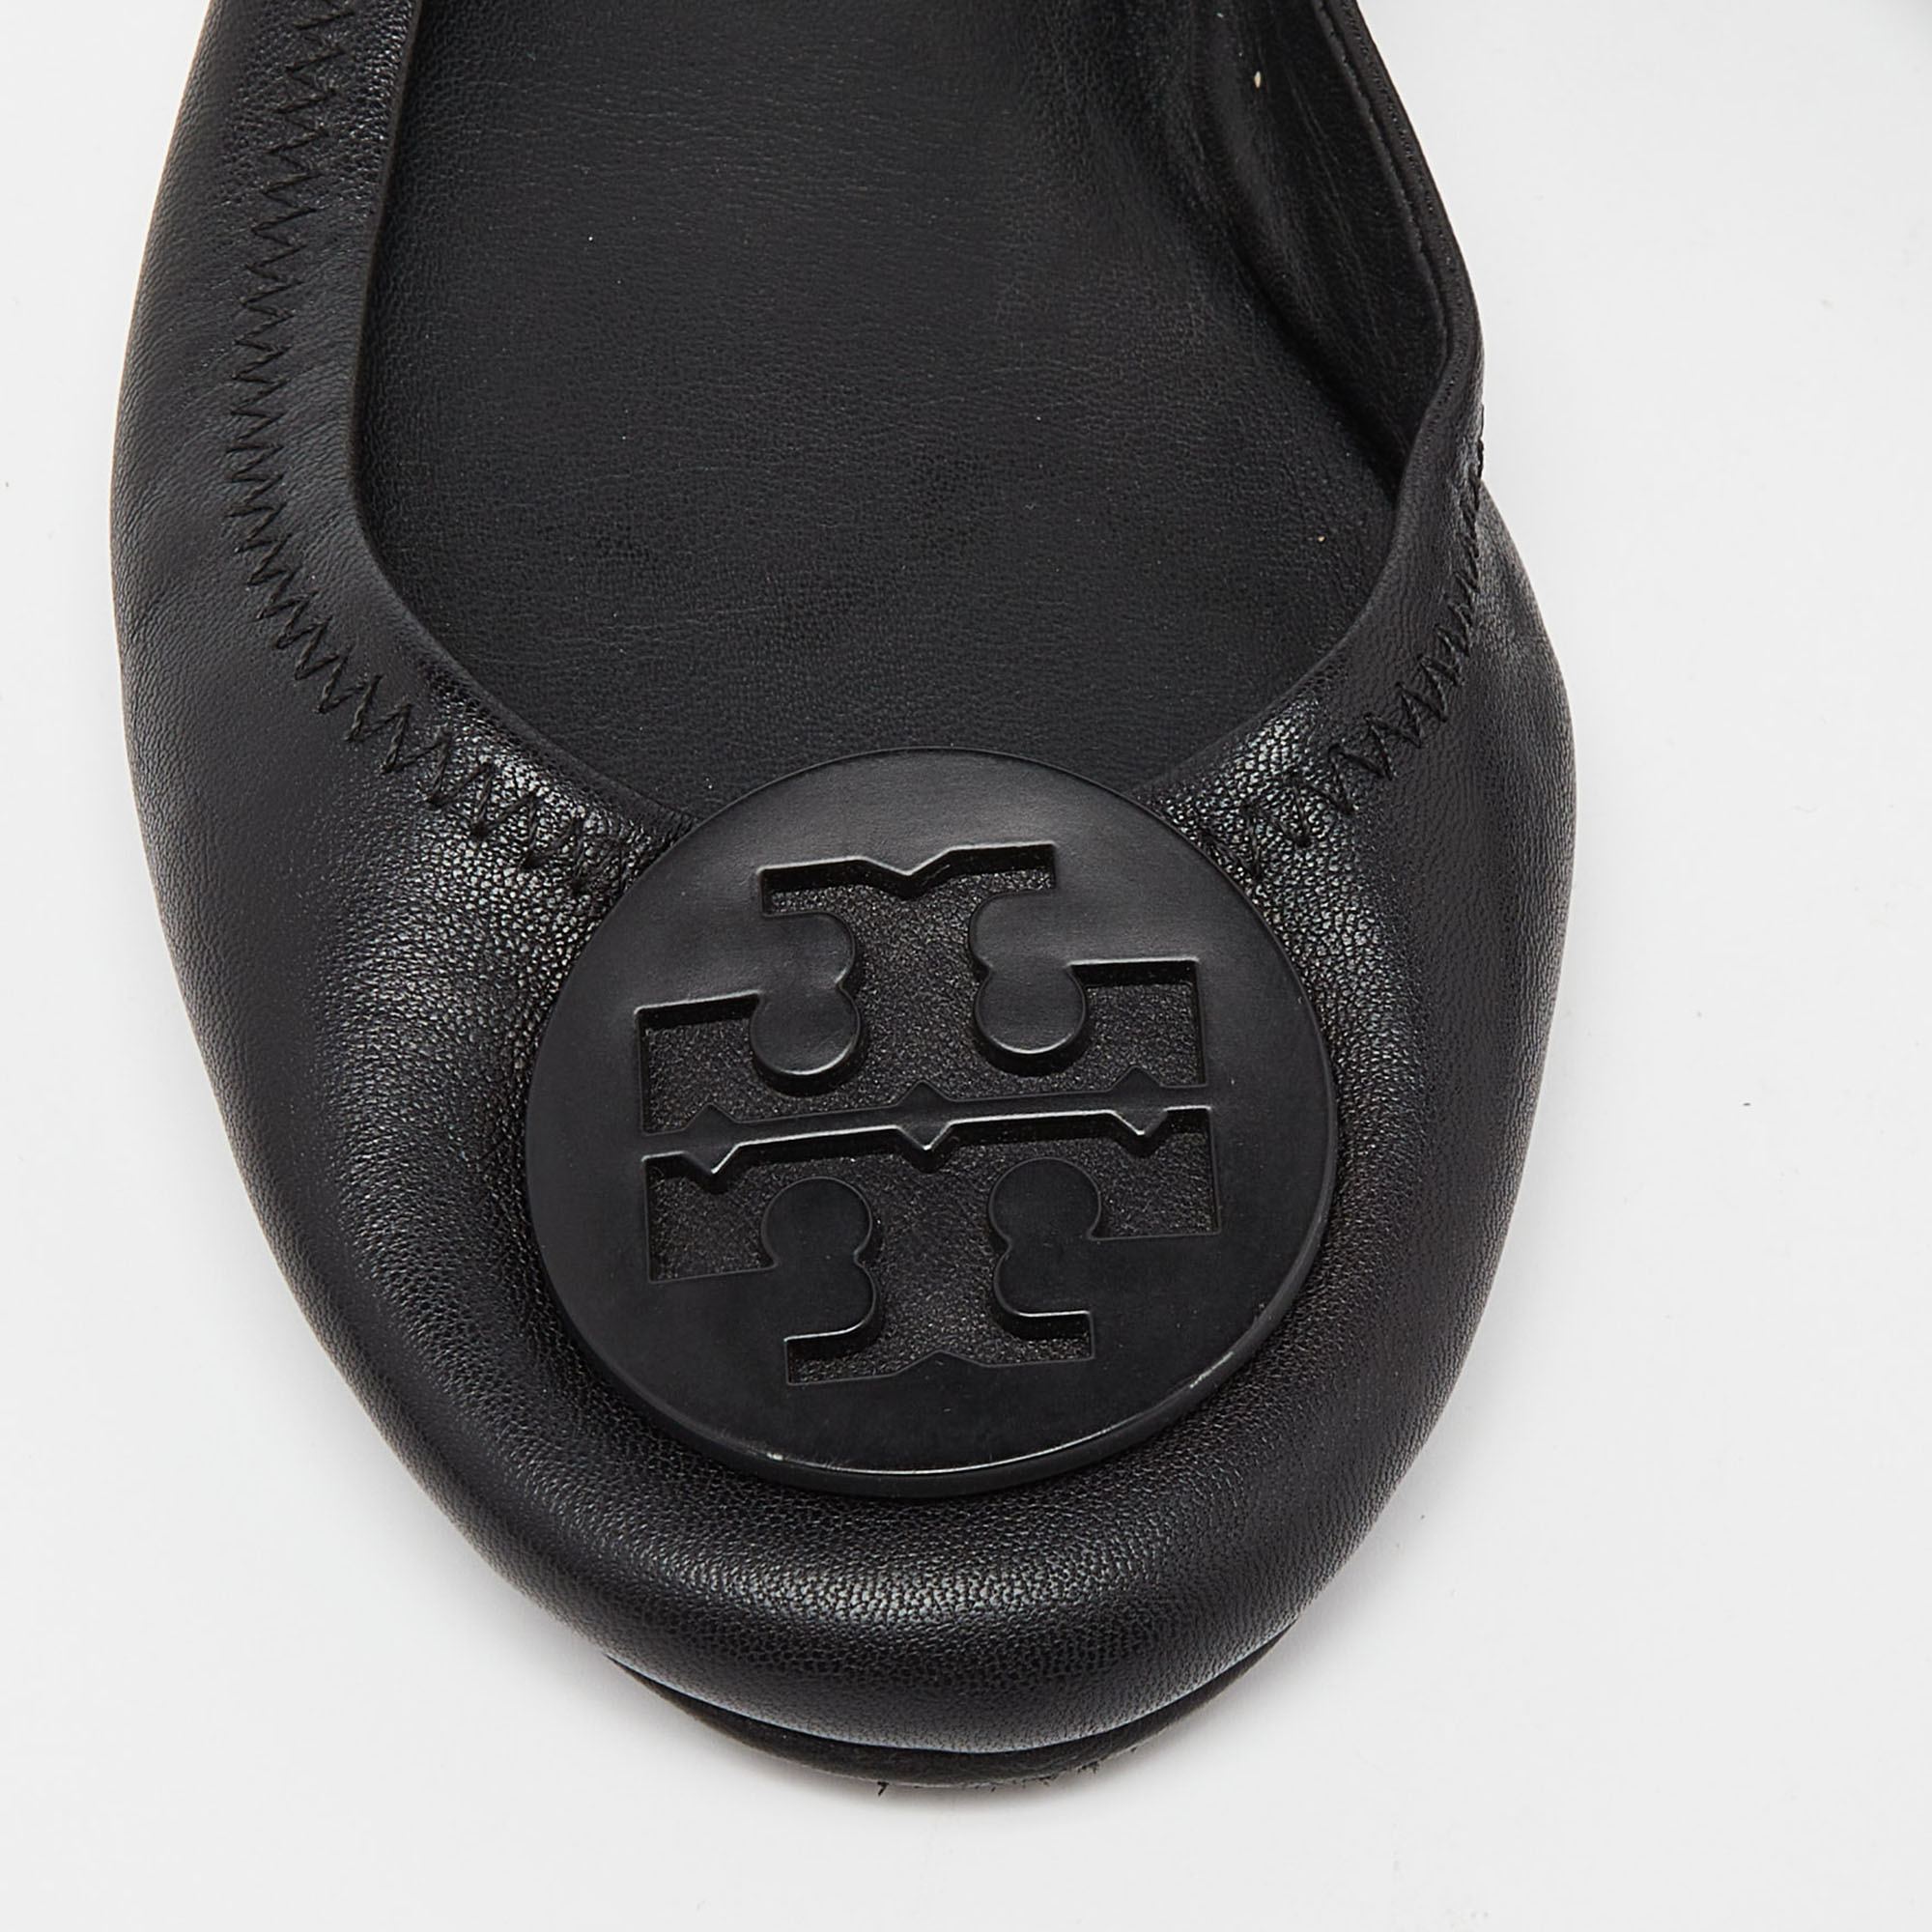 Tory Burch Black Leather Ballet Flats Size 38